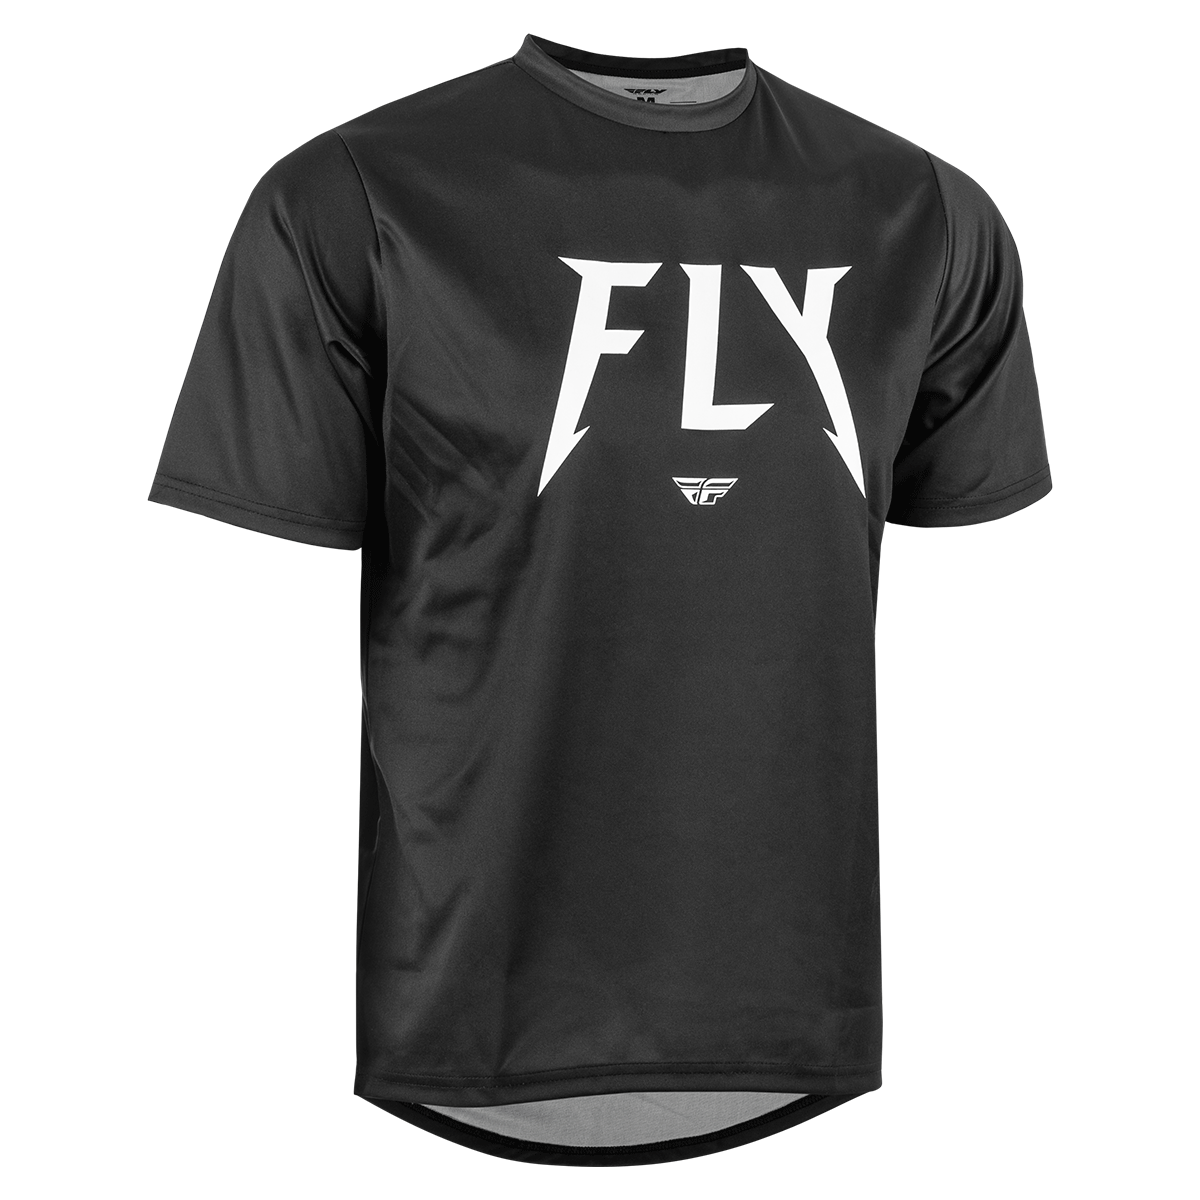 FLY Racing Action S.E. Jersey 352-8118S